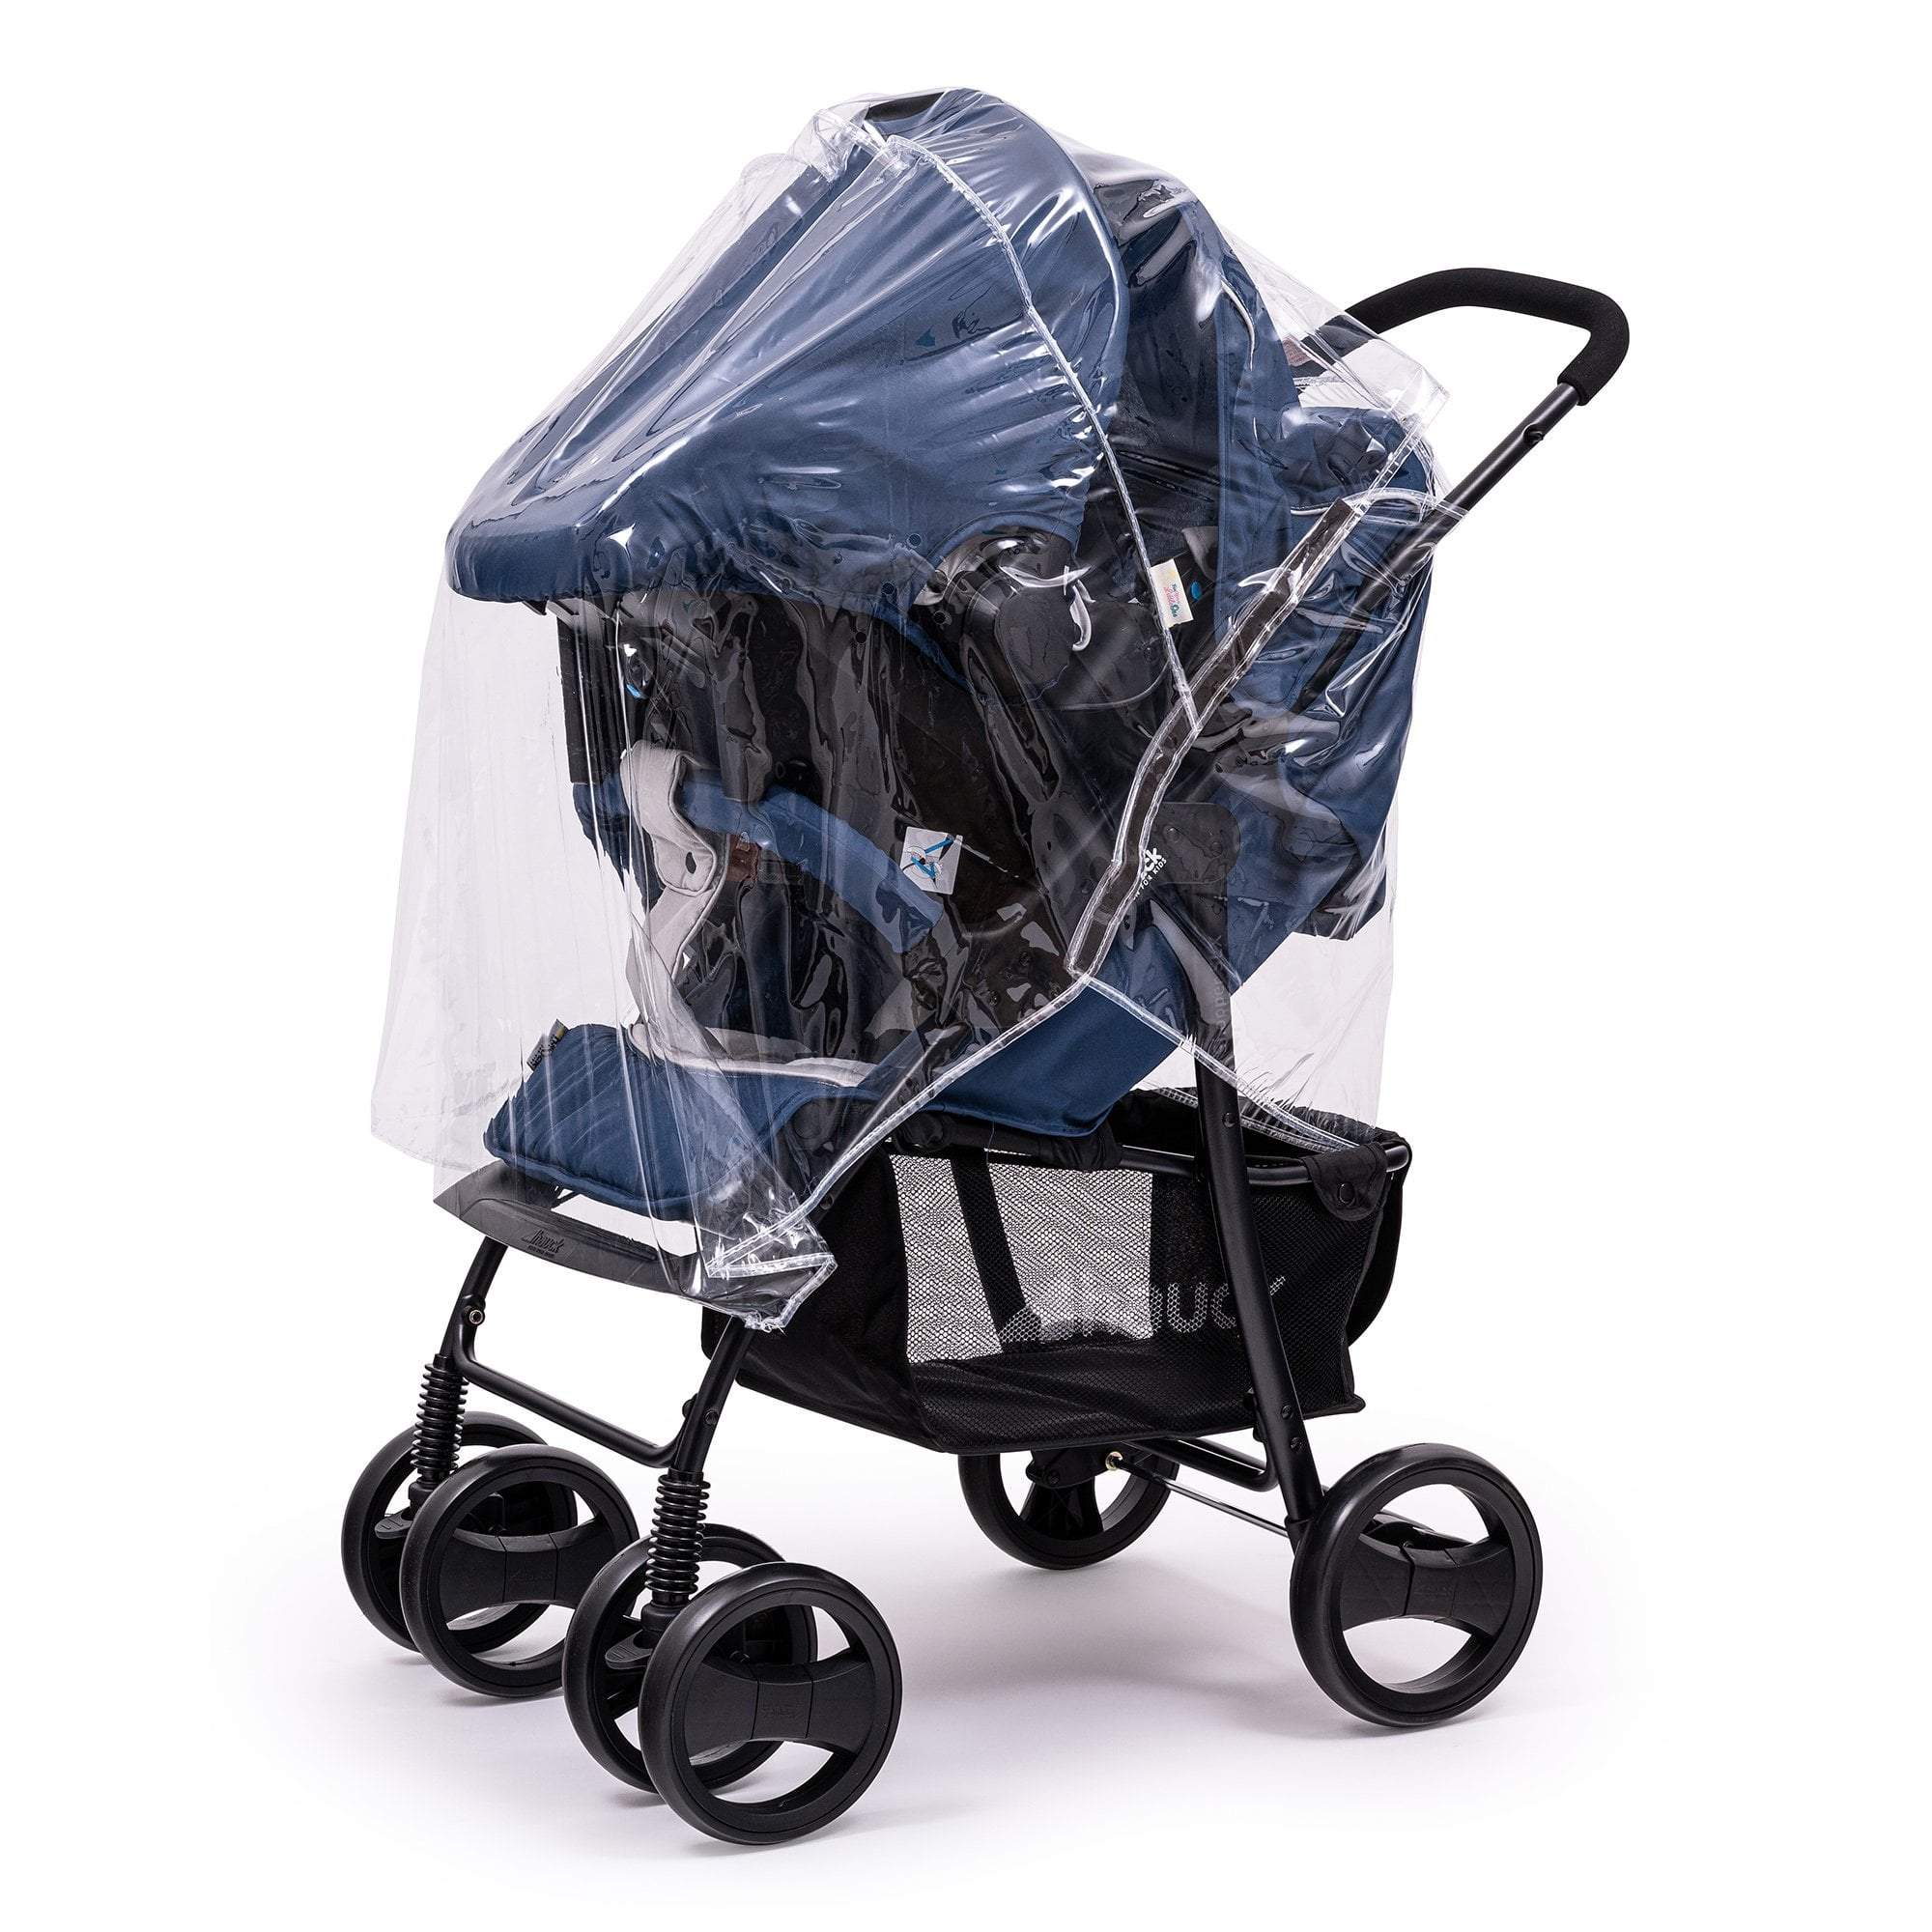 Travel System Raincover Compatible with Babyzen - Fits All Models - For Your Little One